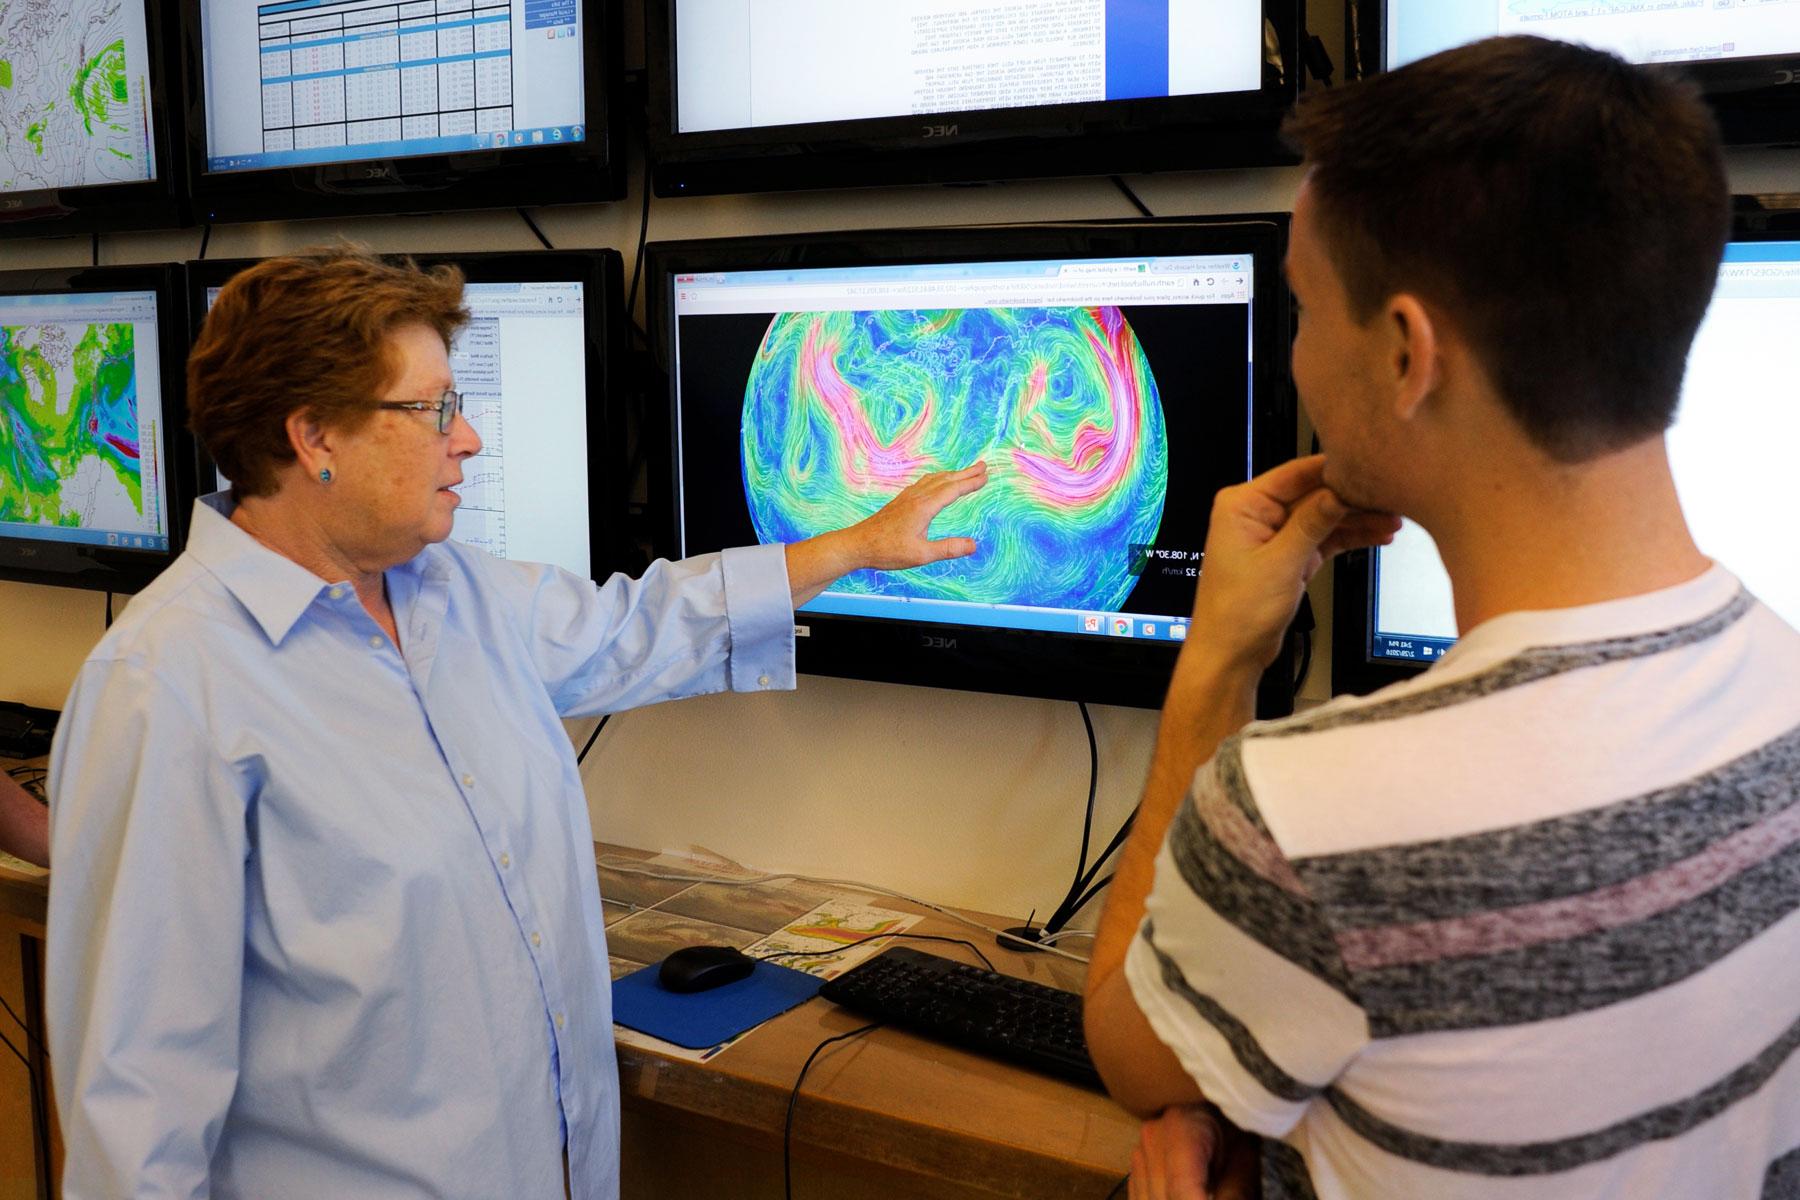 A professor points to a screen showing weather patterns to a student.